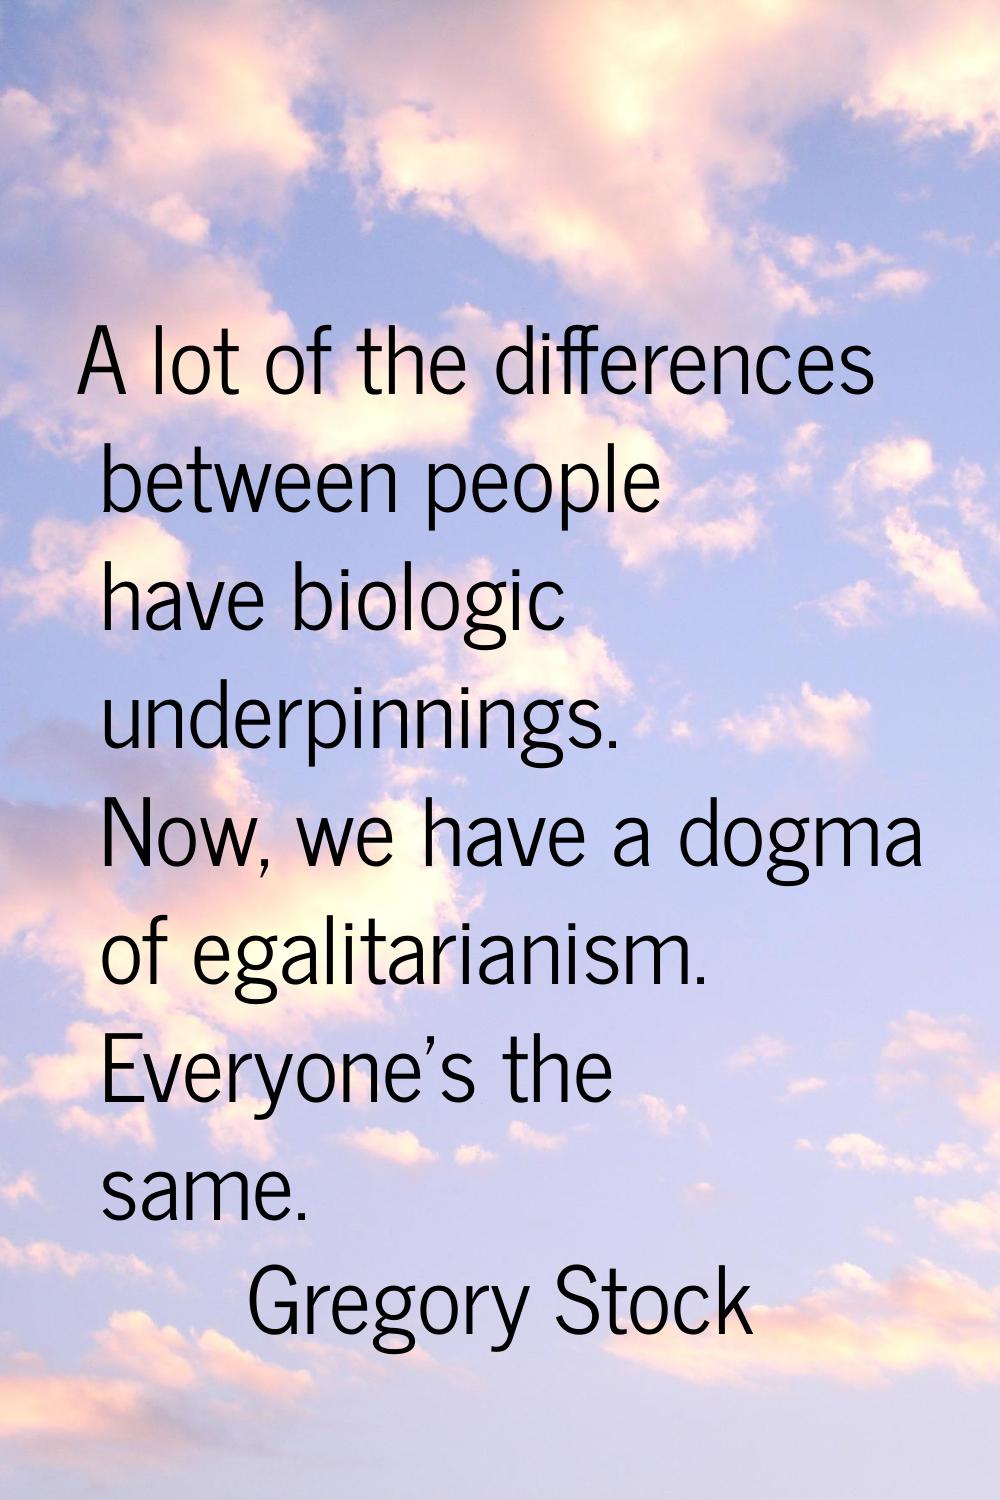 A lot of the differences between people have biologic underpinnings. Now, we have a dogma of egalit